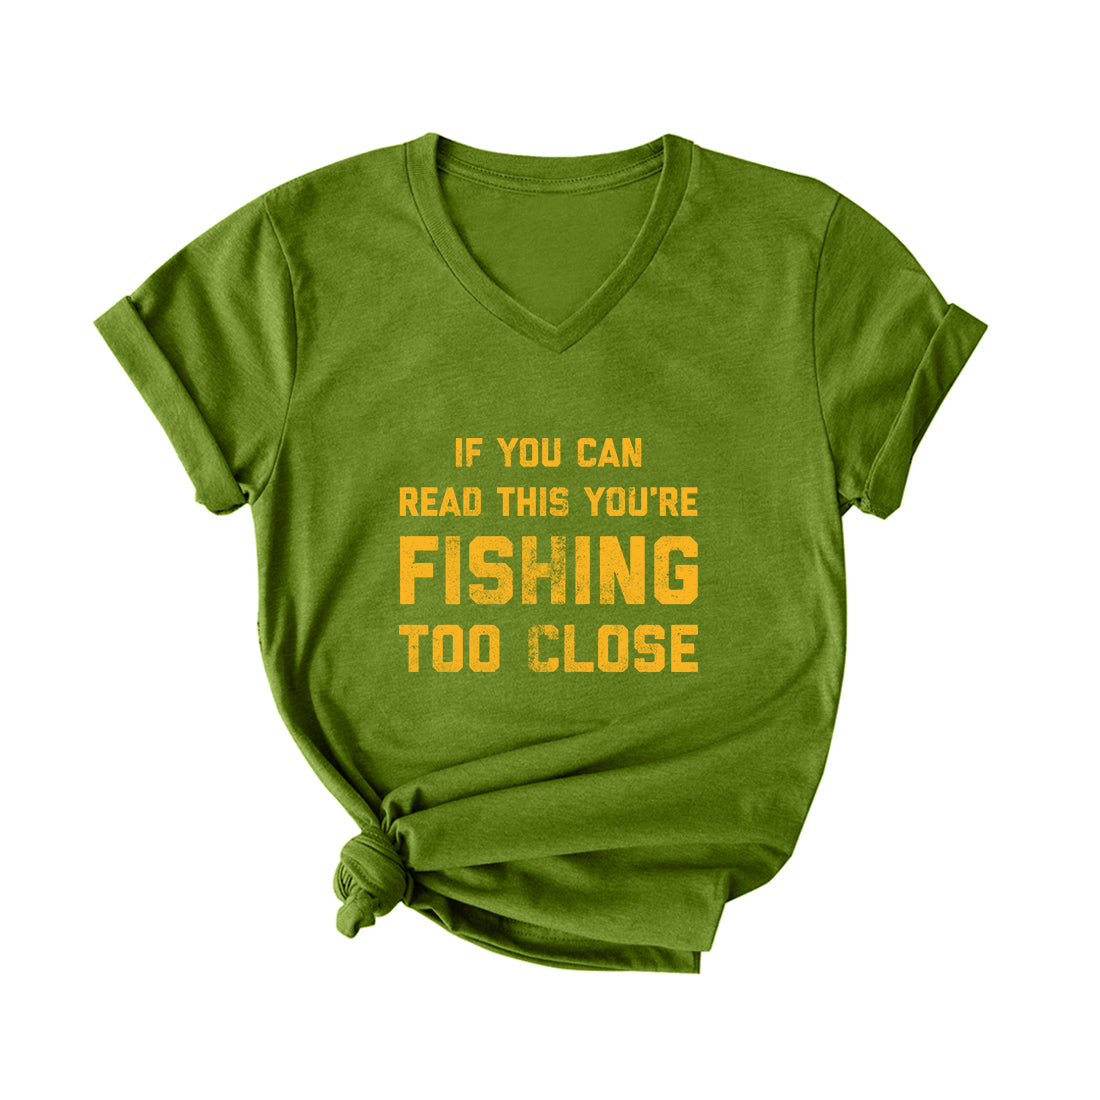 YOU ARE FISHING TOO CLOSE V Neck T-Shirt for Women